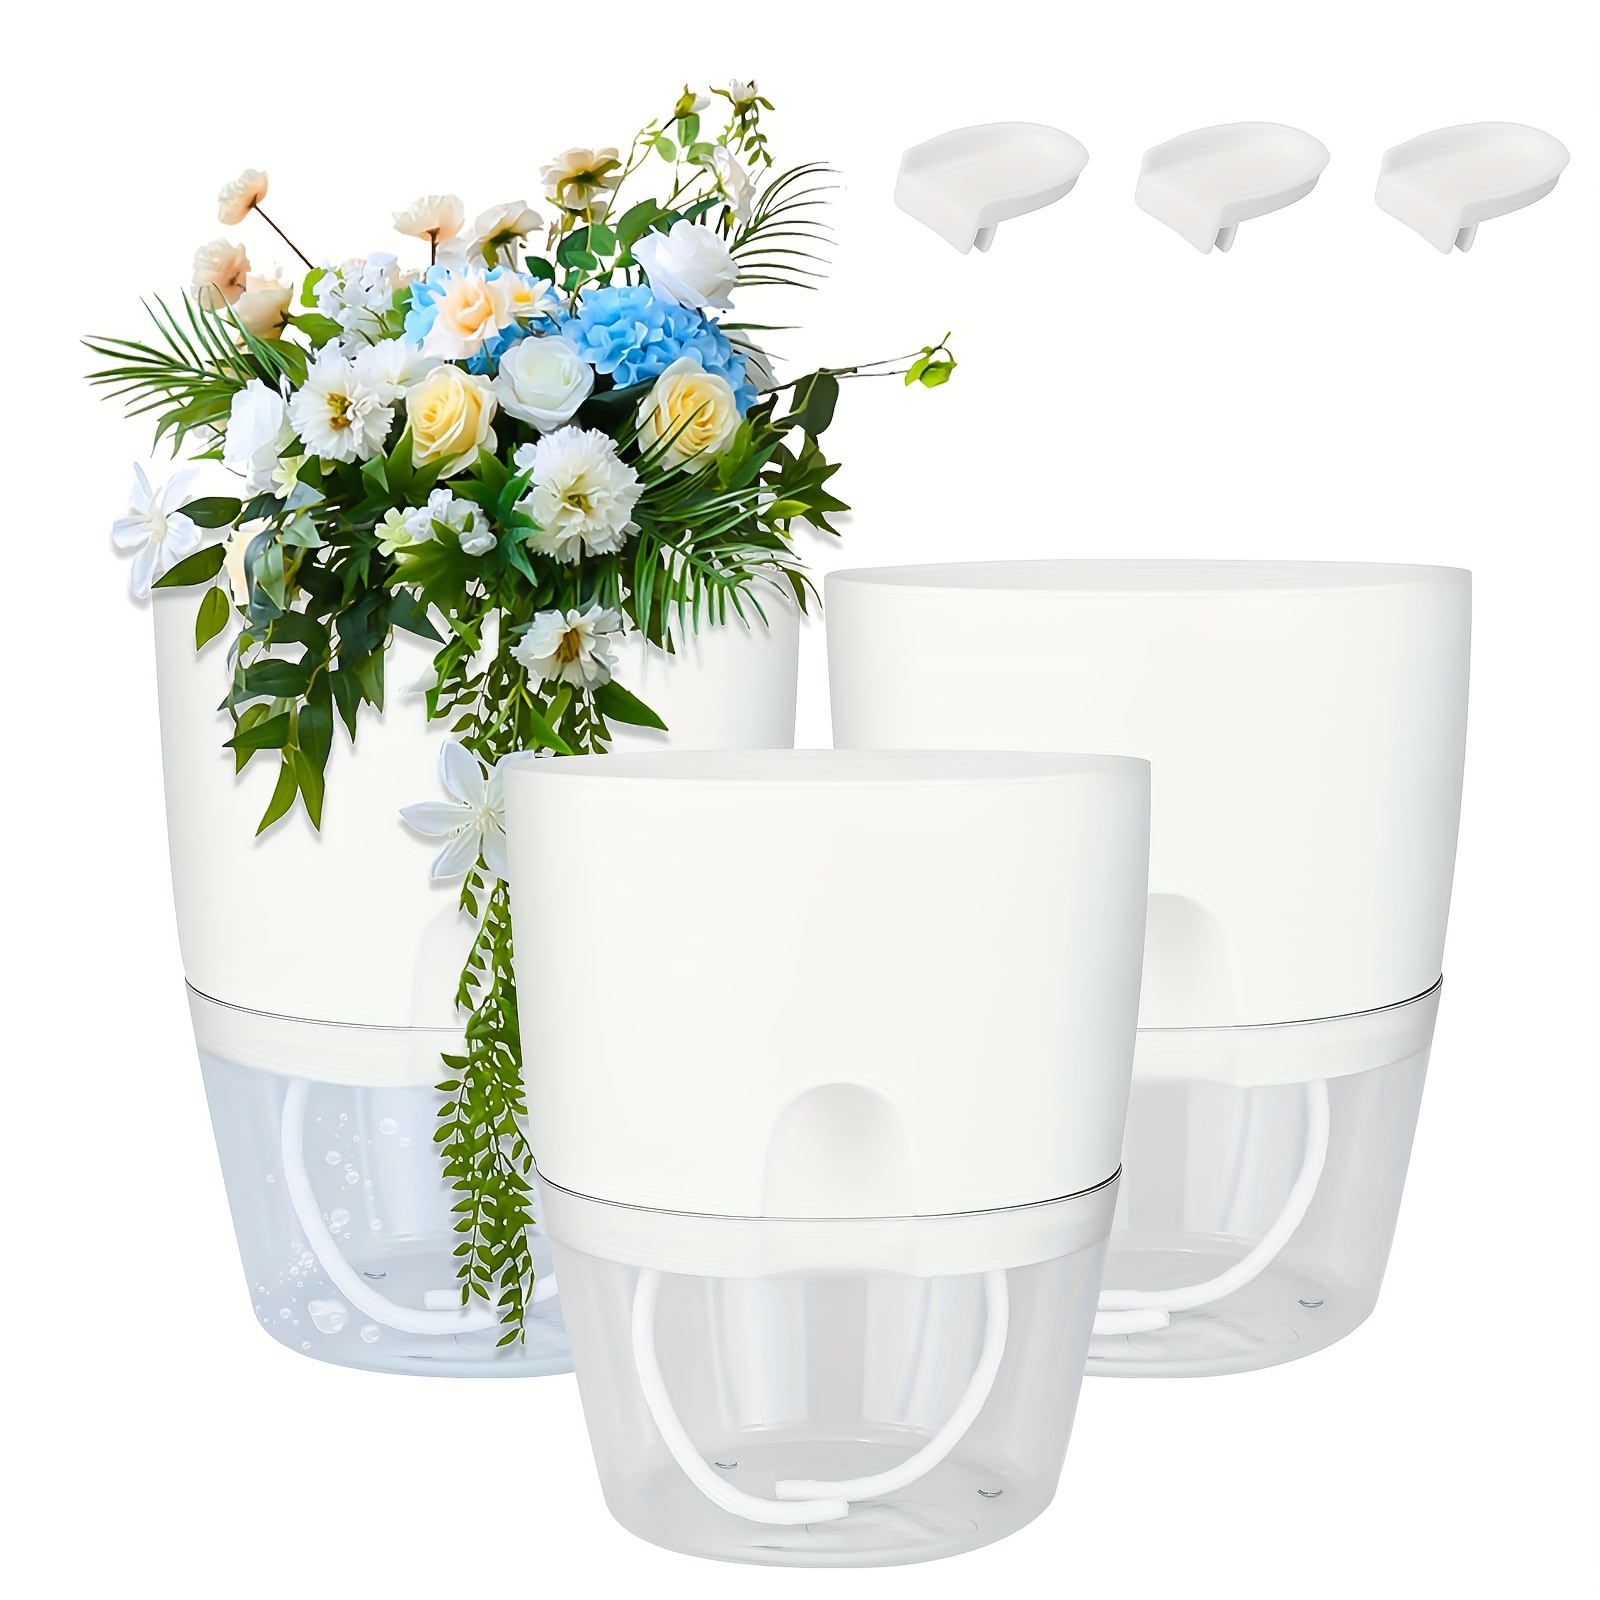 

3pcs, Automatic Watering Planter, 15.3cm Indoor Plastic Flower Pot With Cotton Rope And 3 Water Flakes, Modern Decorative Plastic Flower Pot Large Water Storage (white)